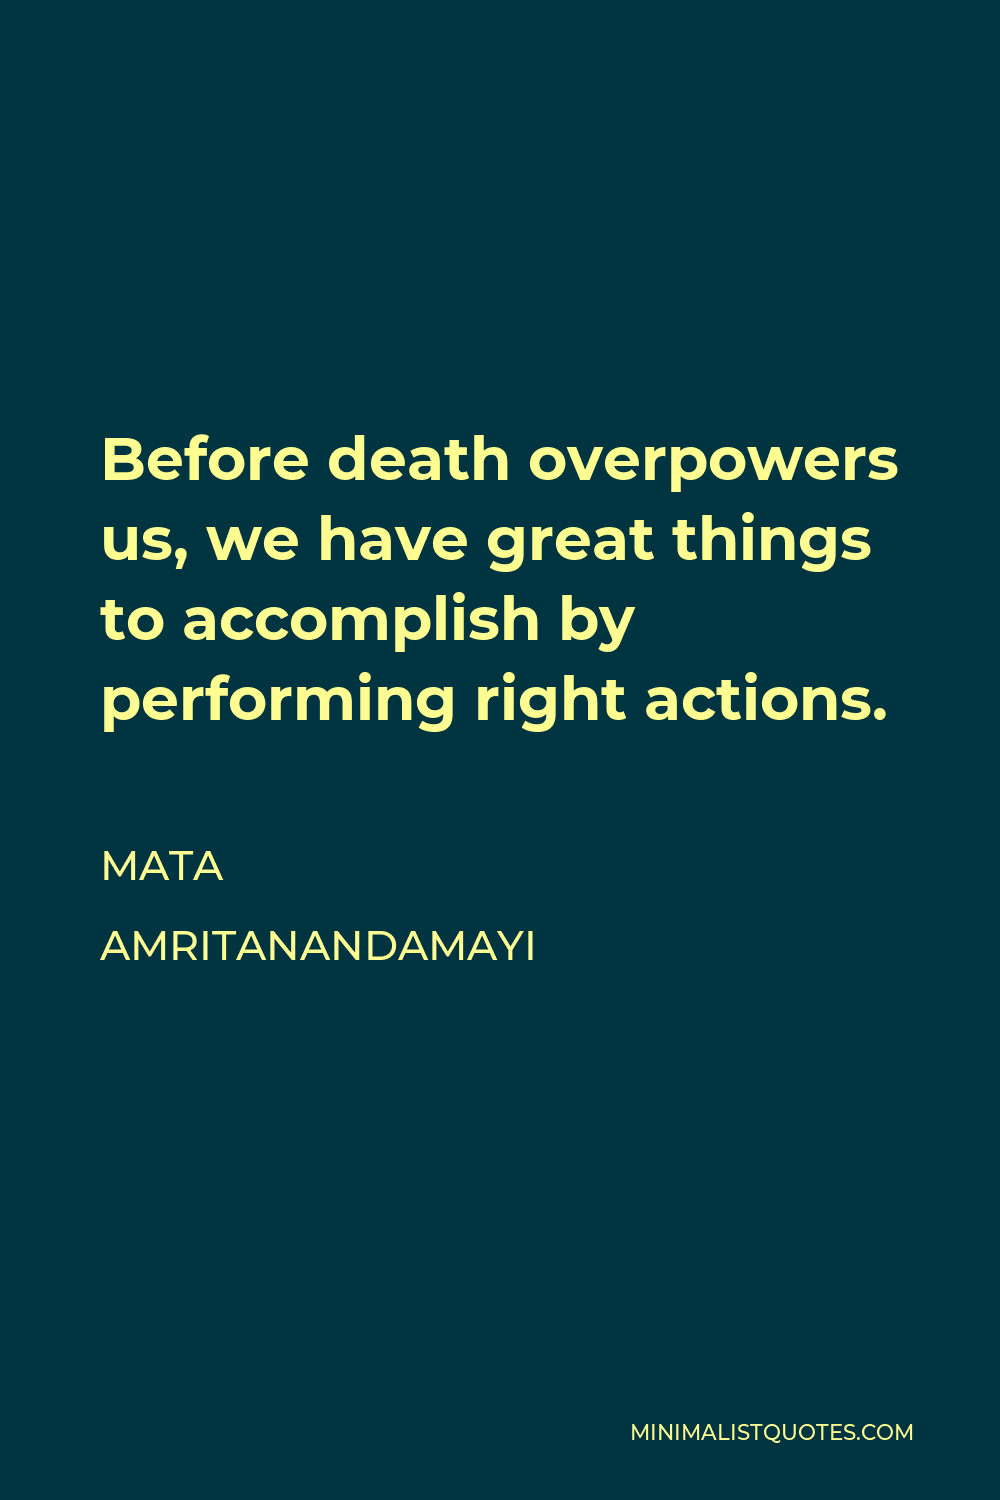 Mata Amritanandamayi Quote - Before death overpowers us, we have great things to accomplish by performing right actions.